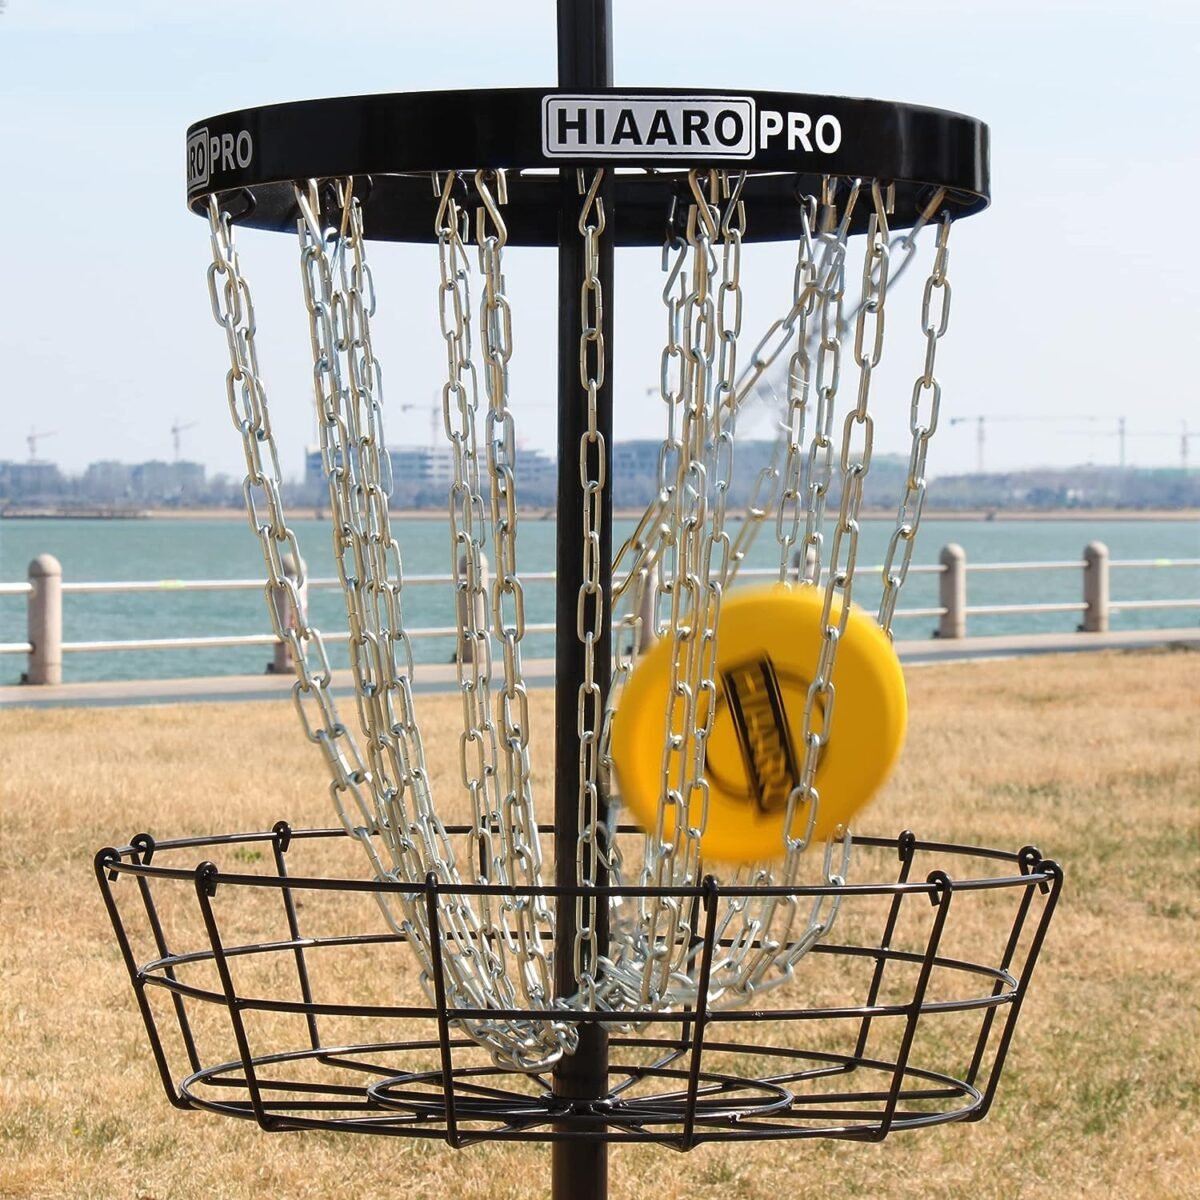 Comparing 5 Top Disc Golf Baskets for Beginners and Pros